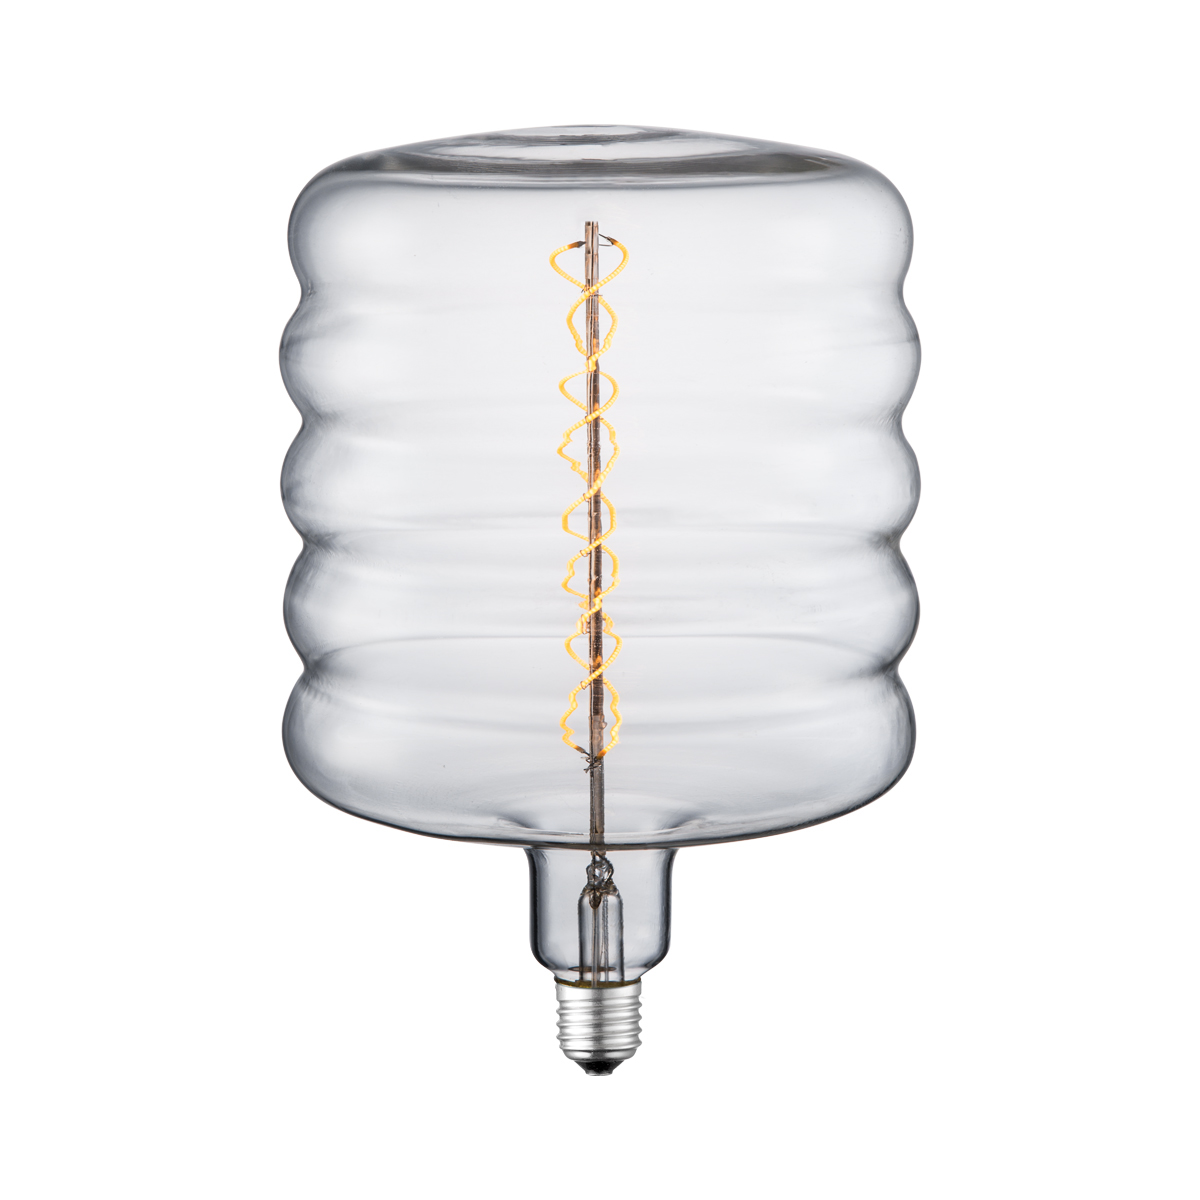 Tangla lighting - TLB-8102-06CL - LED Light Bulb Double Spiral filament - special 4W clear - bucket - dimmable - E27